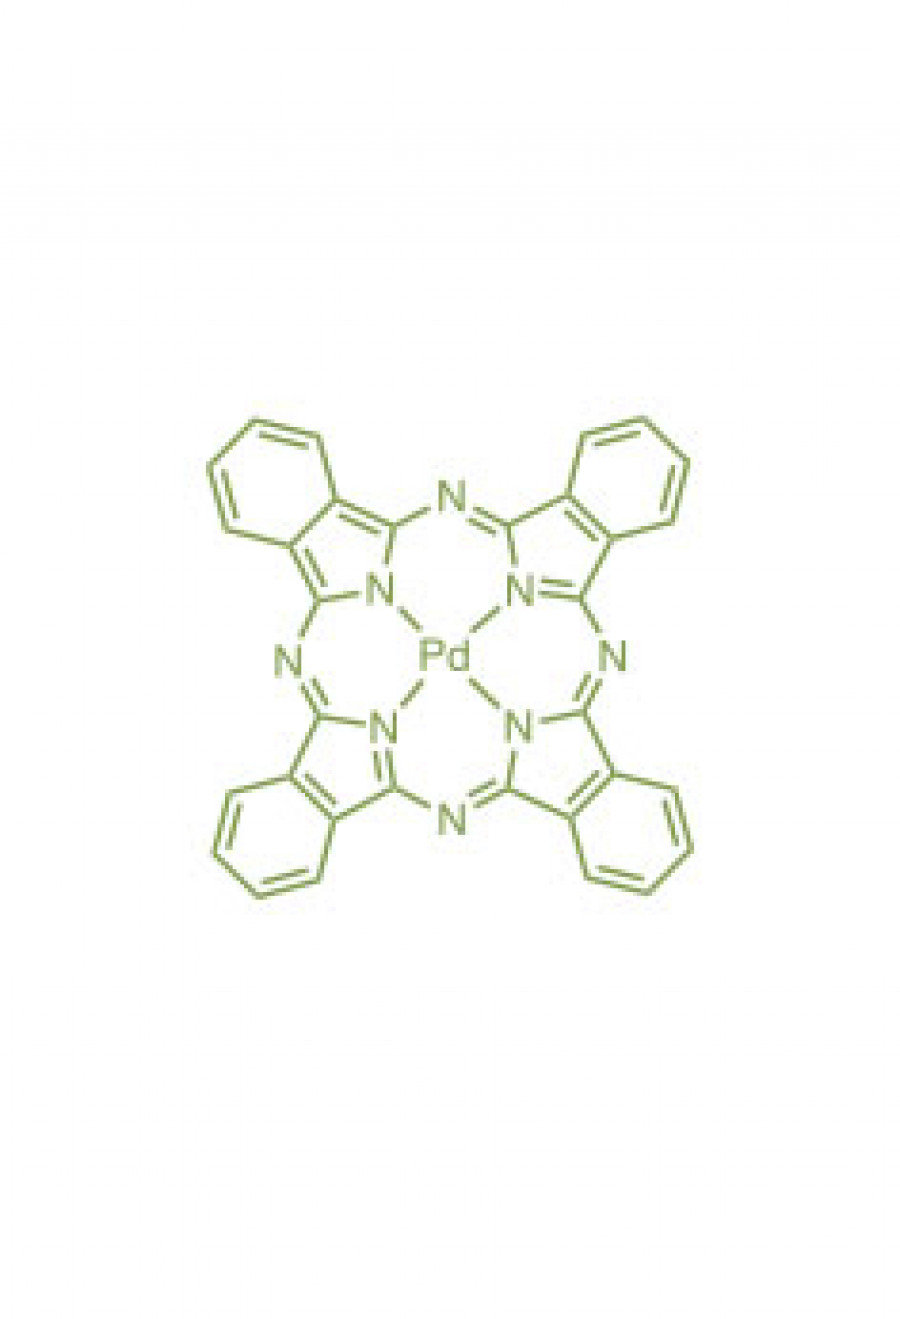 palladium(II) phthalocyanine  | Porphychem Expert porphyrin synthesis for research & industry